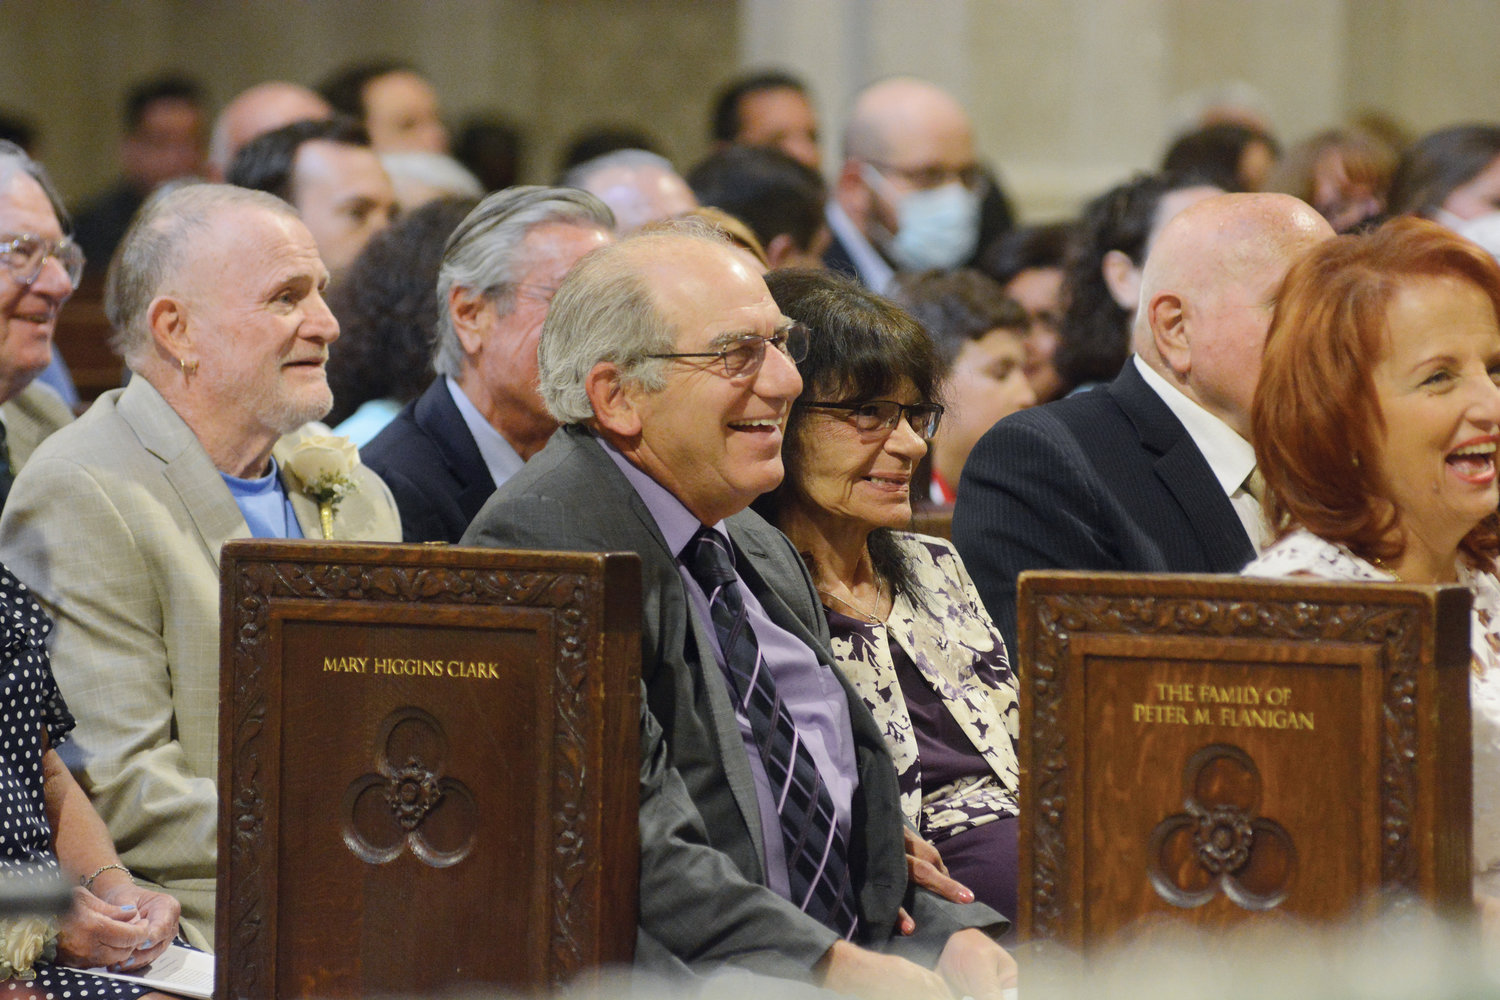 Couples enjoy the homily given by Cardinal Dolan.